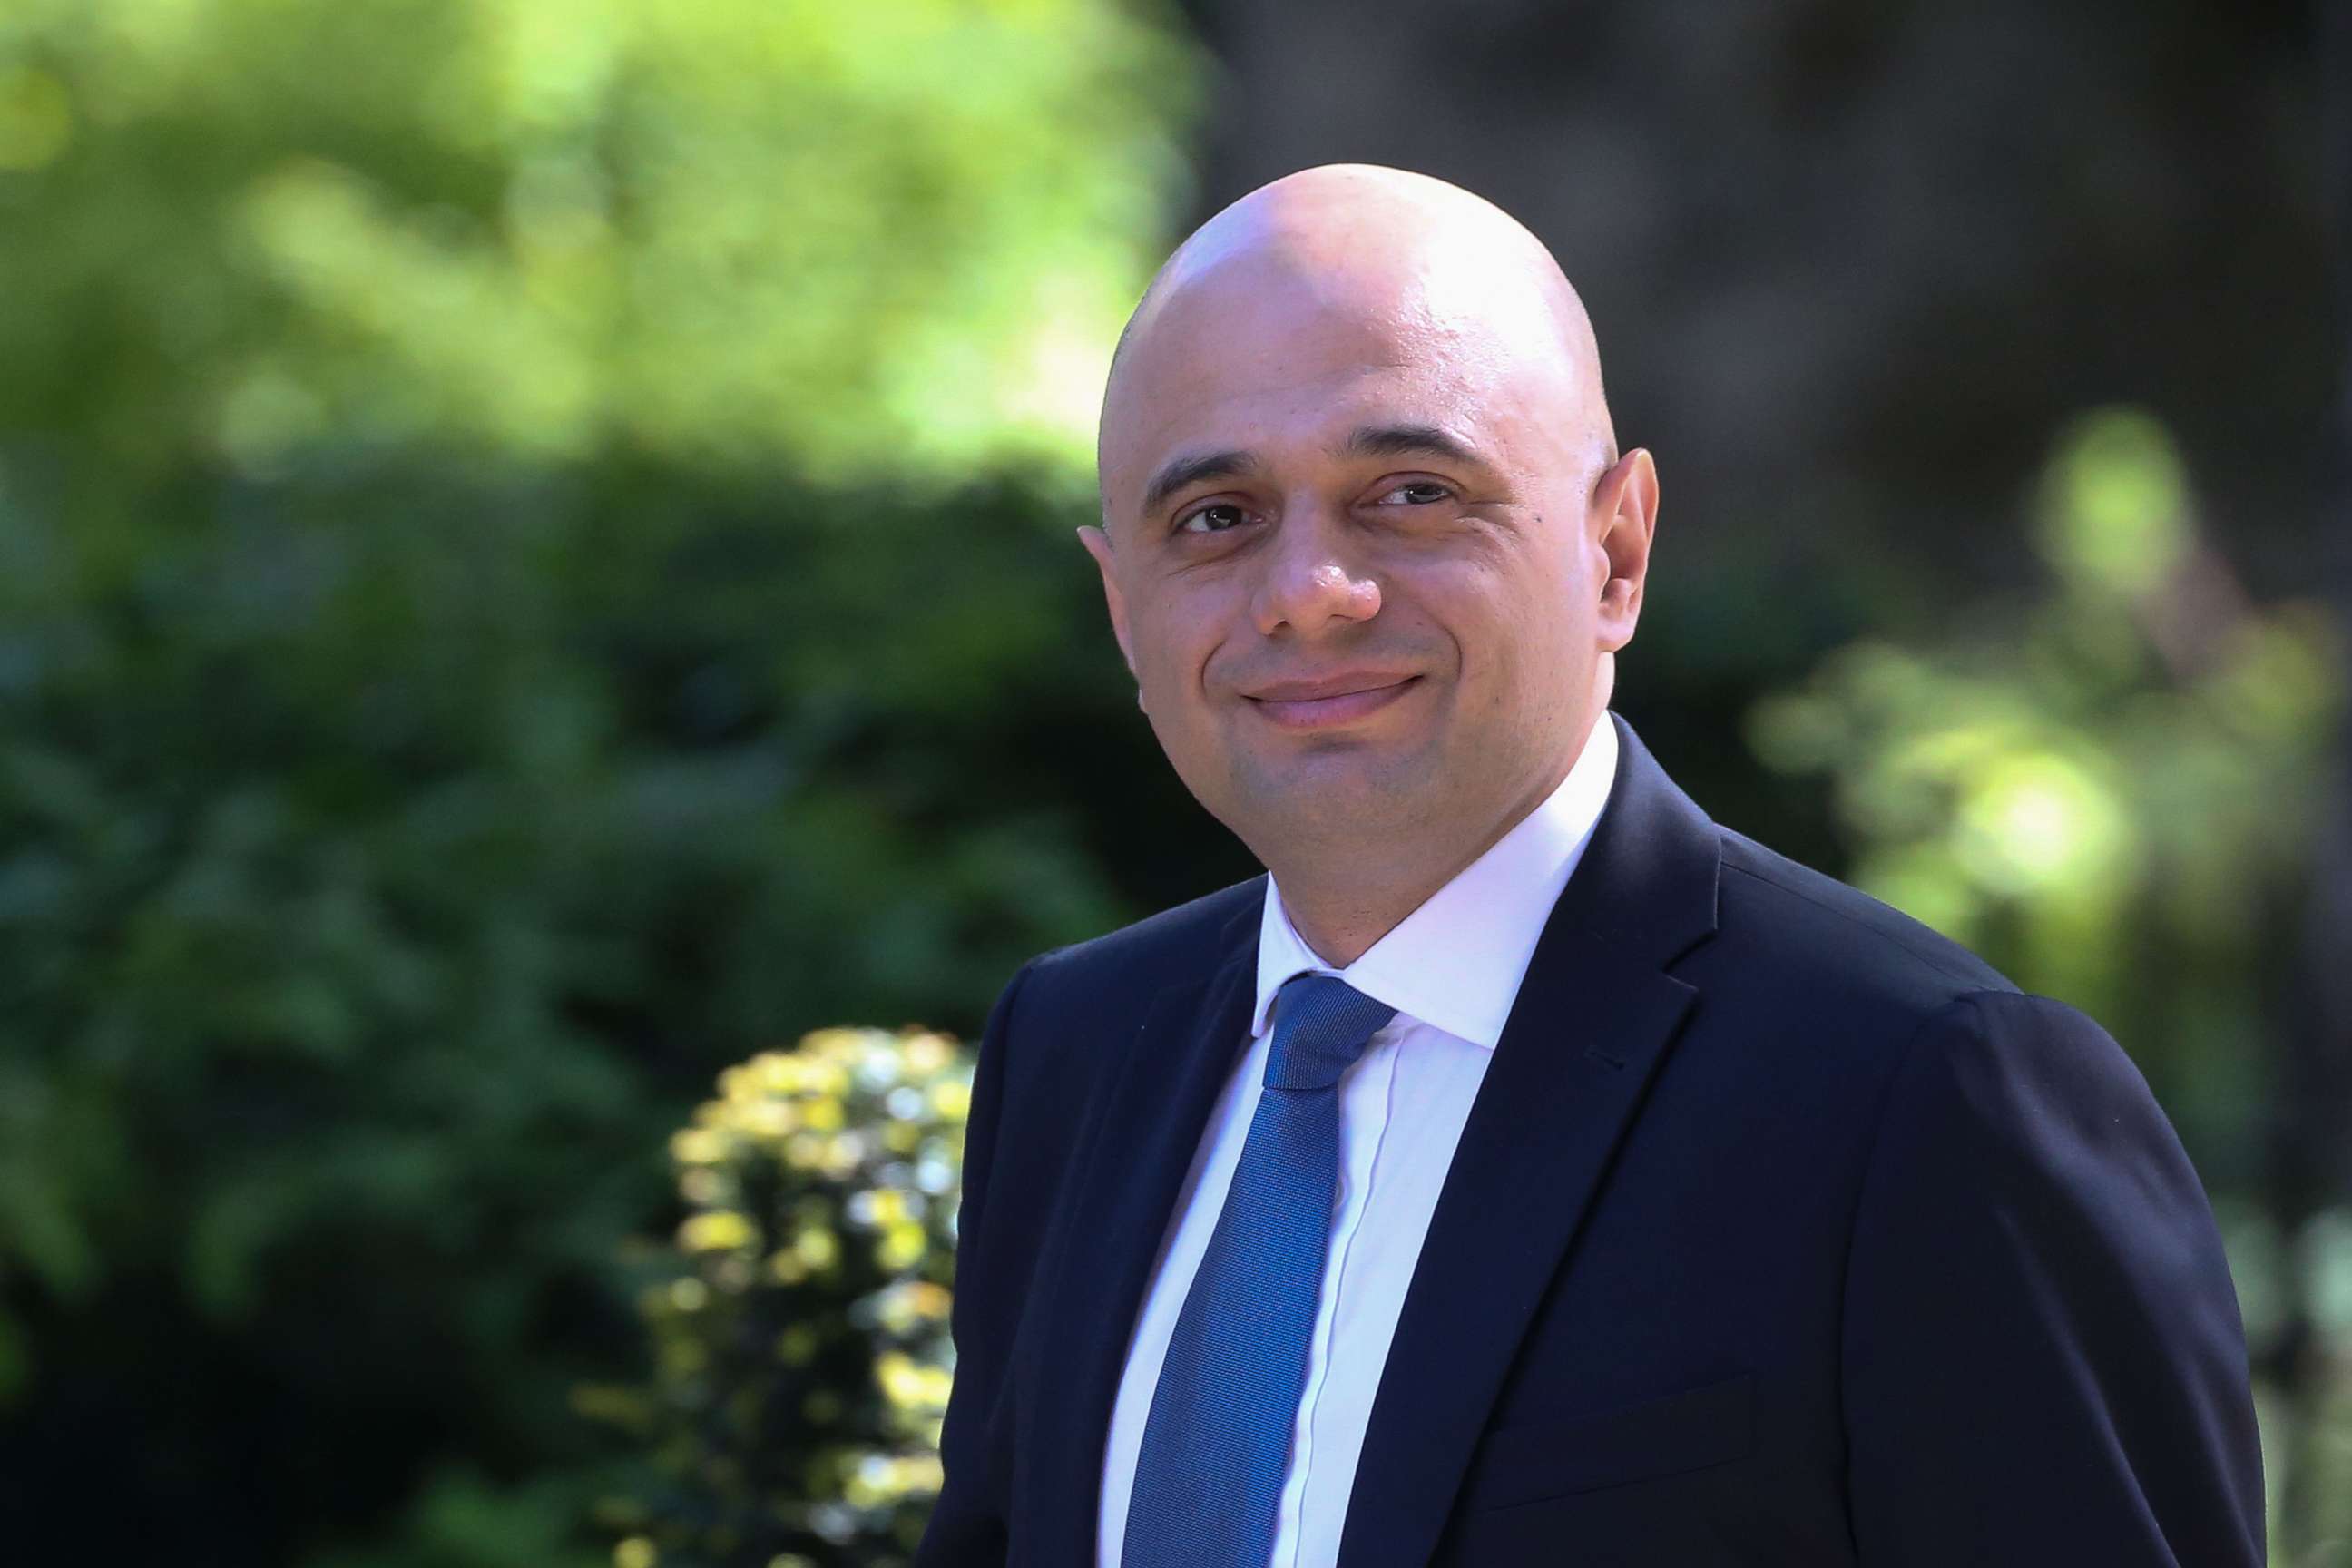 PHOTO: Britain's Home Secretary Sajid Javid arrives to attend the weekly meeting of the Cabinet at 10 Downing Street in central London, May 14, 2019.